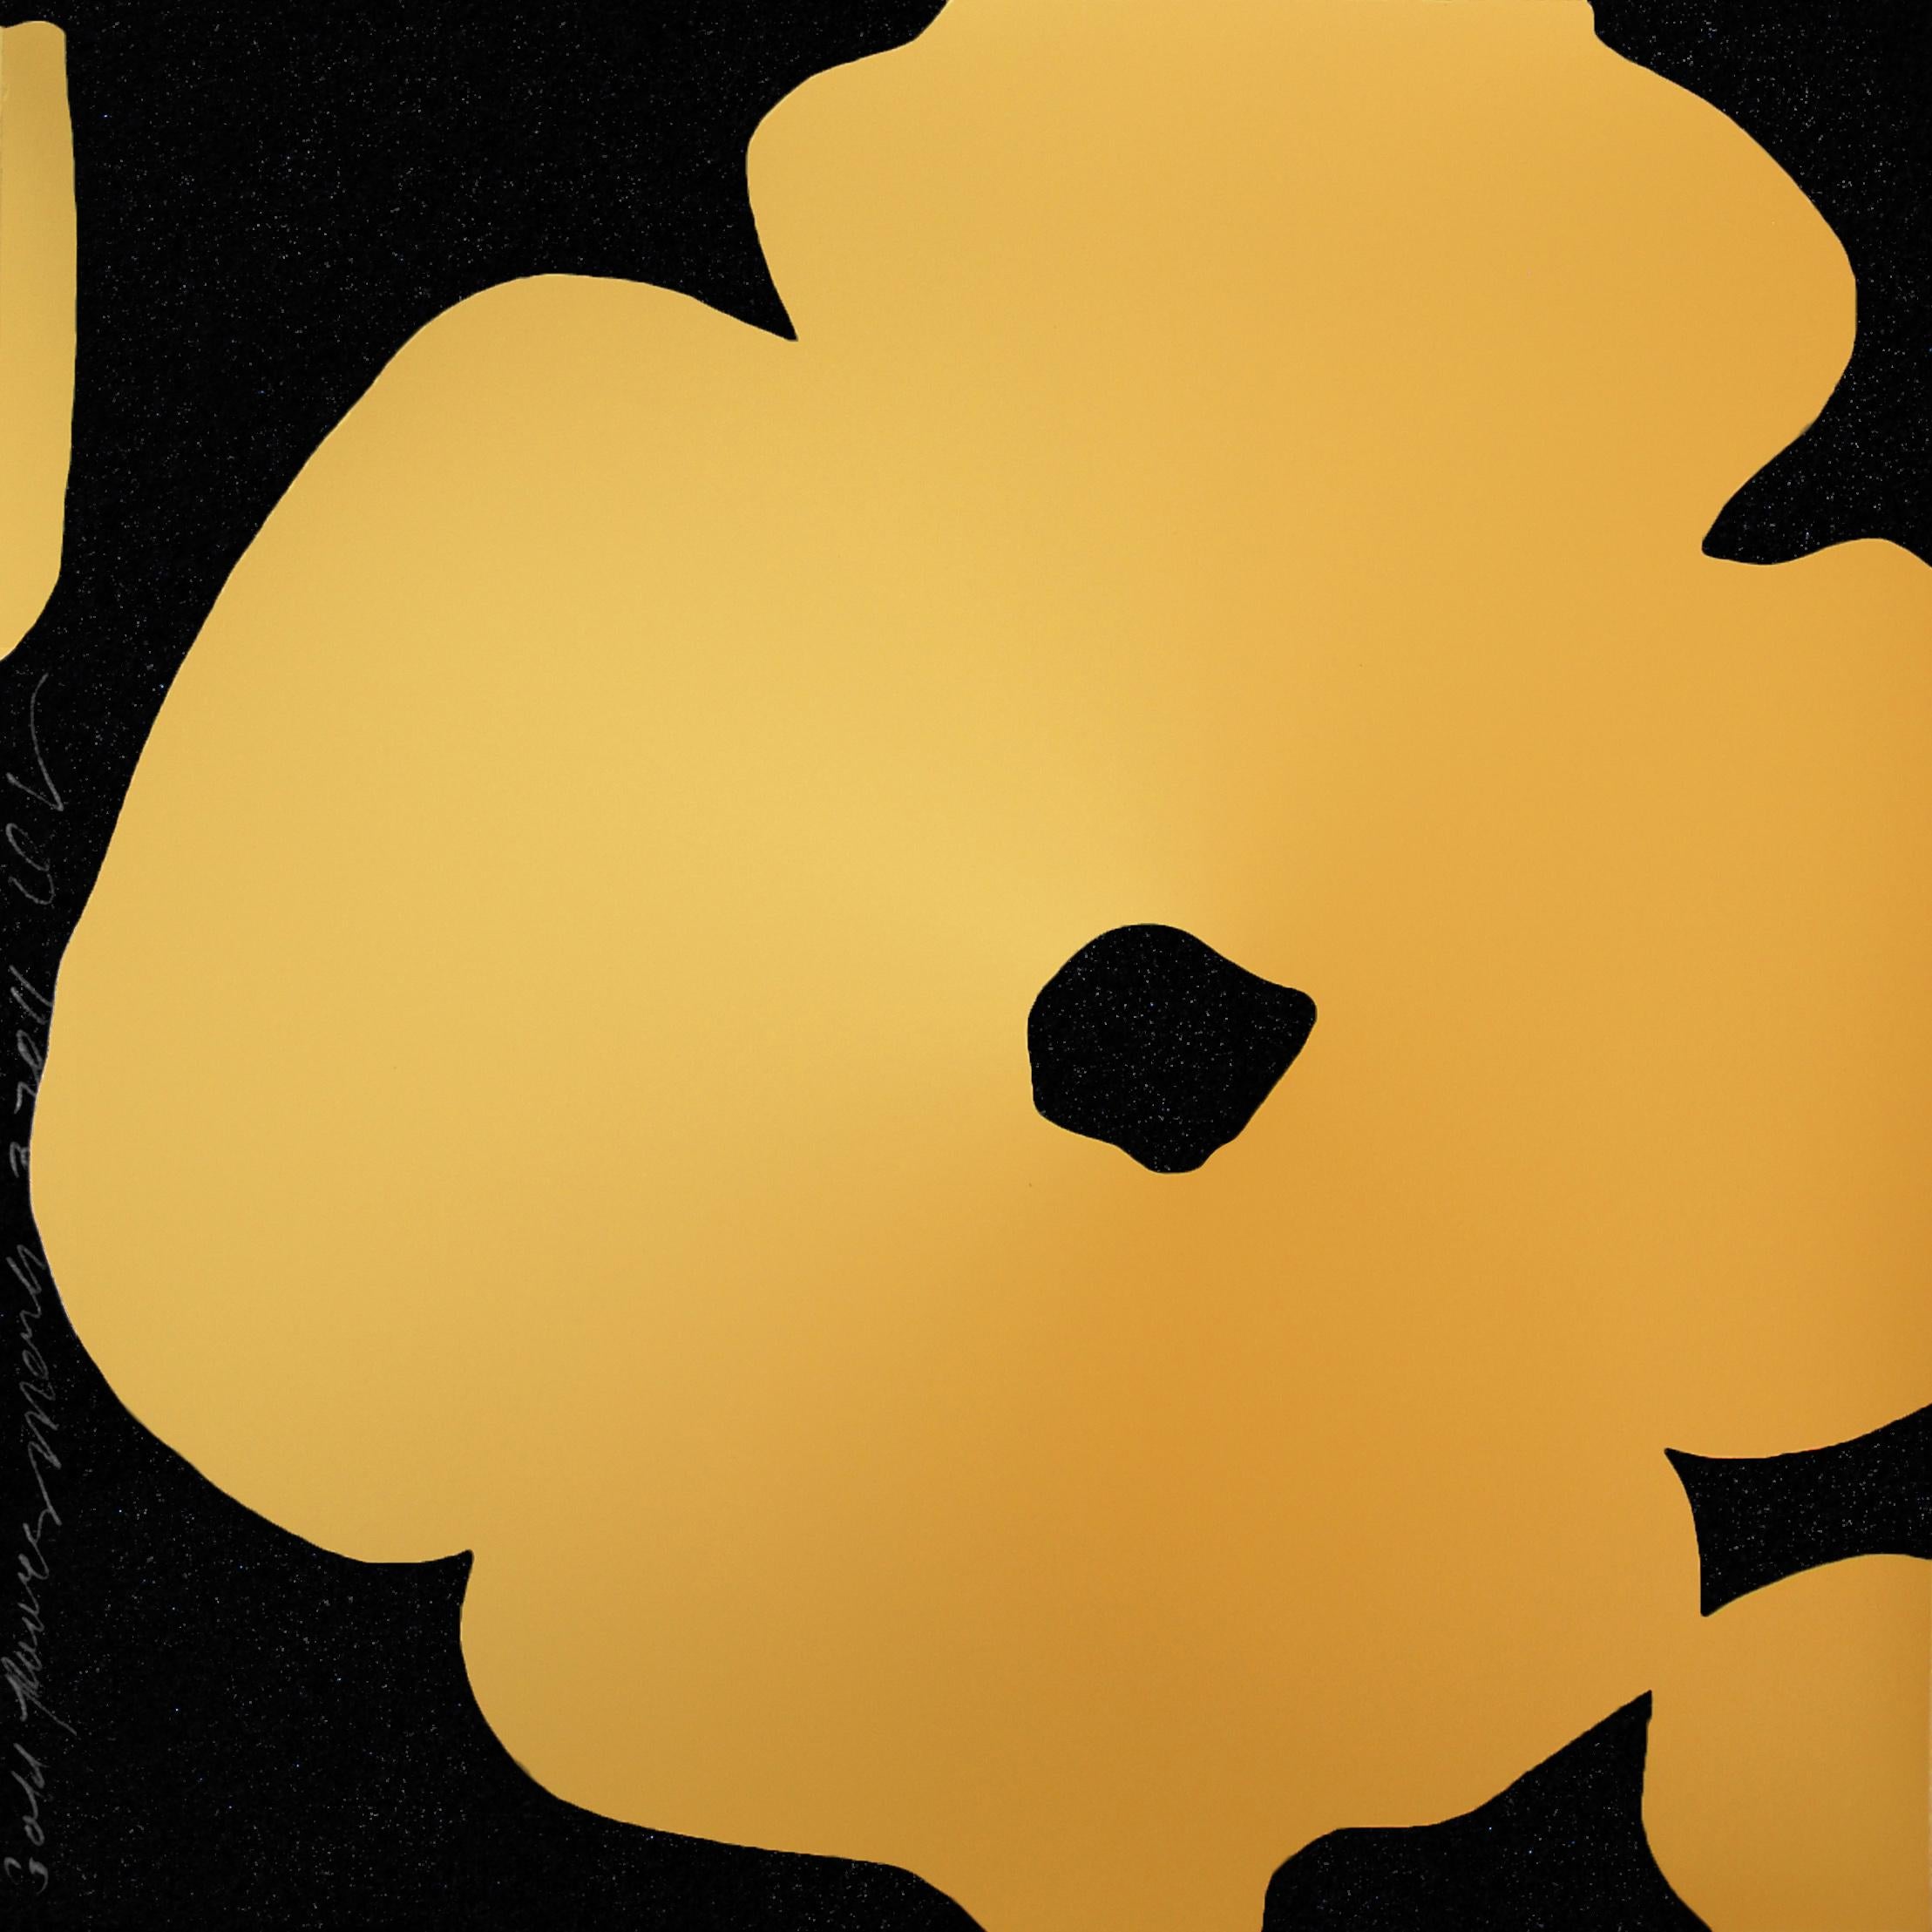 Donald Sultan, Gold Flowers, March 3, 2011, Screenprint with Black Silica. 2